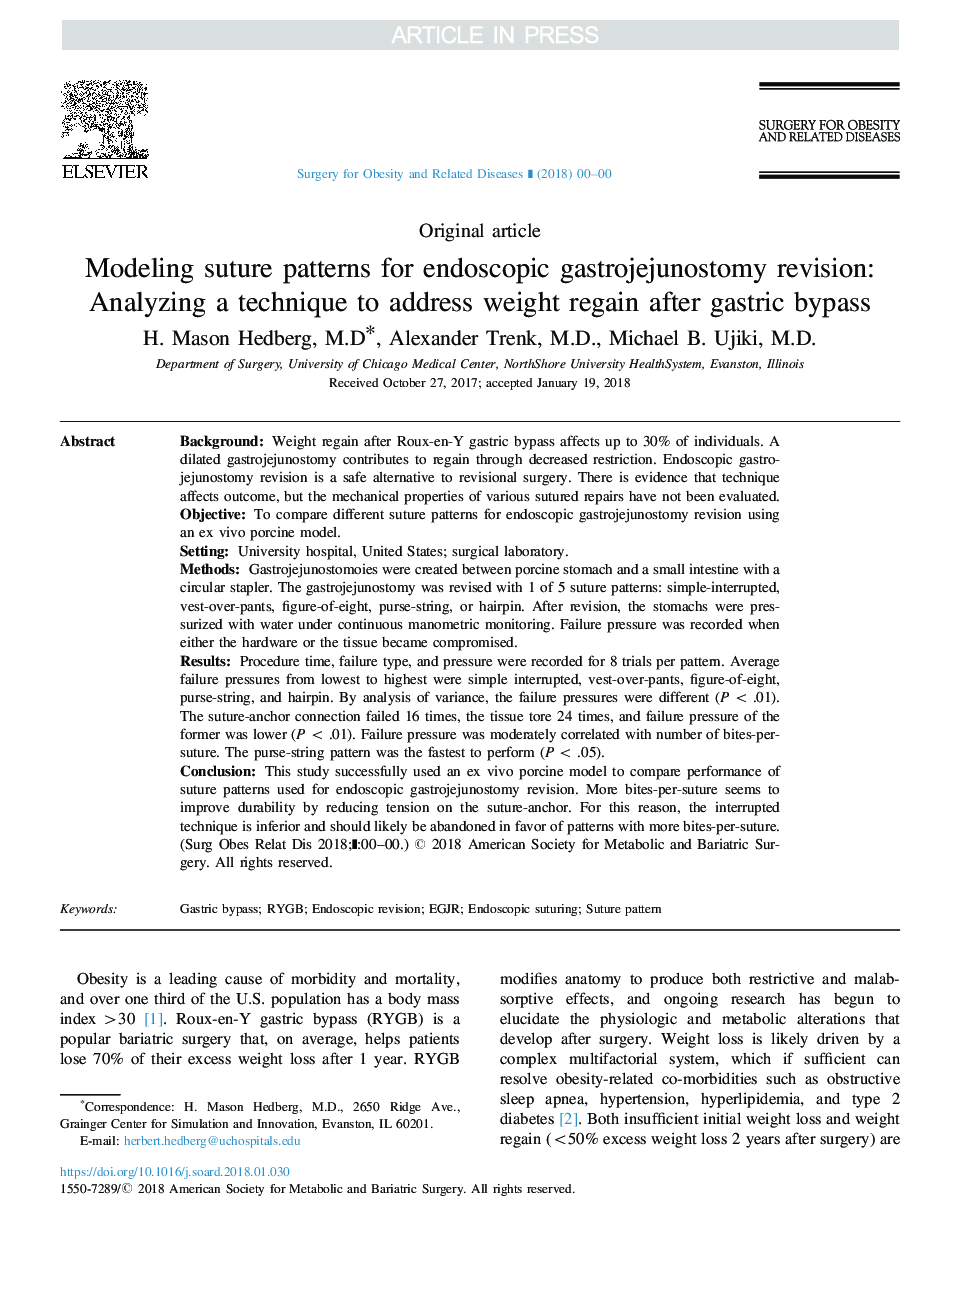 Modeling suture patterns for endoscopic gastrojejunostomy revision: Analyzing a technique to address weight regain after gastric bypass